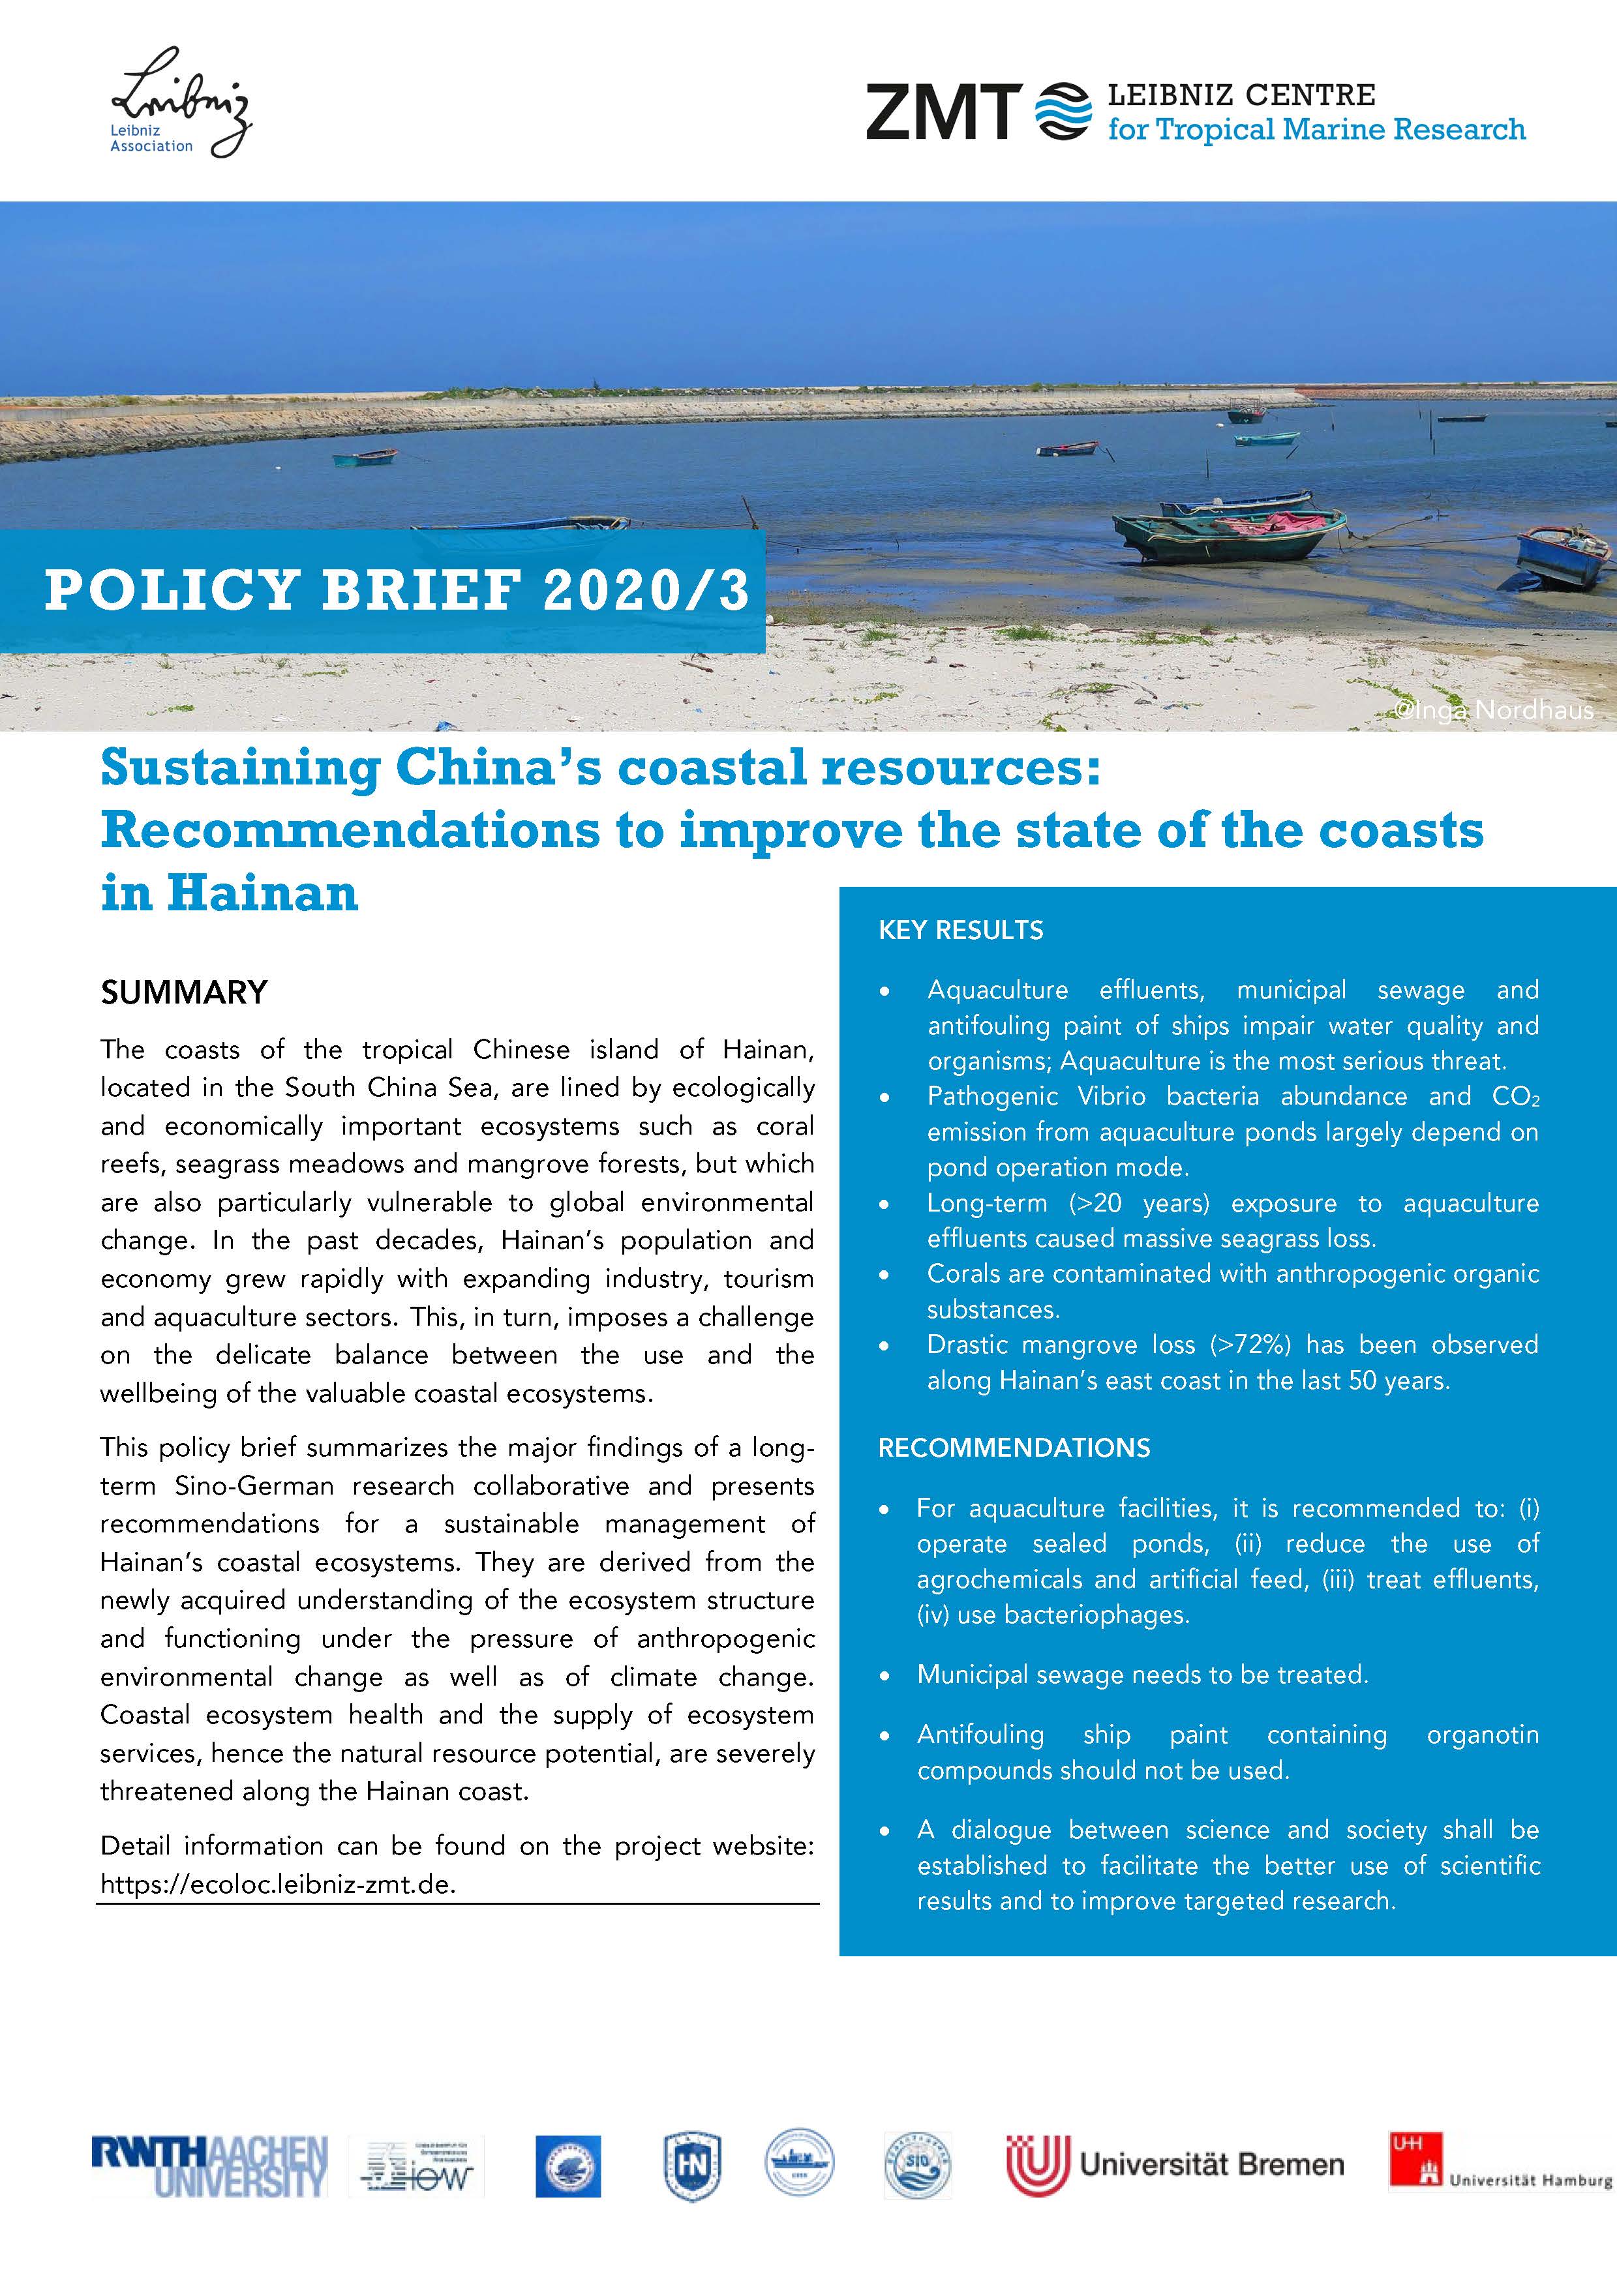 Cover of policy brief China titled Sustaining China's Coastal Resources